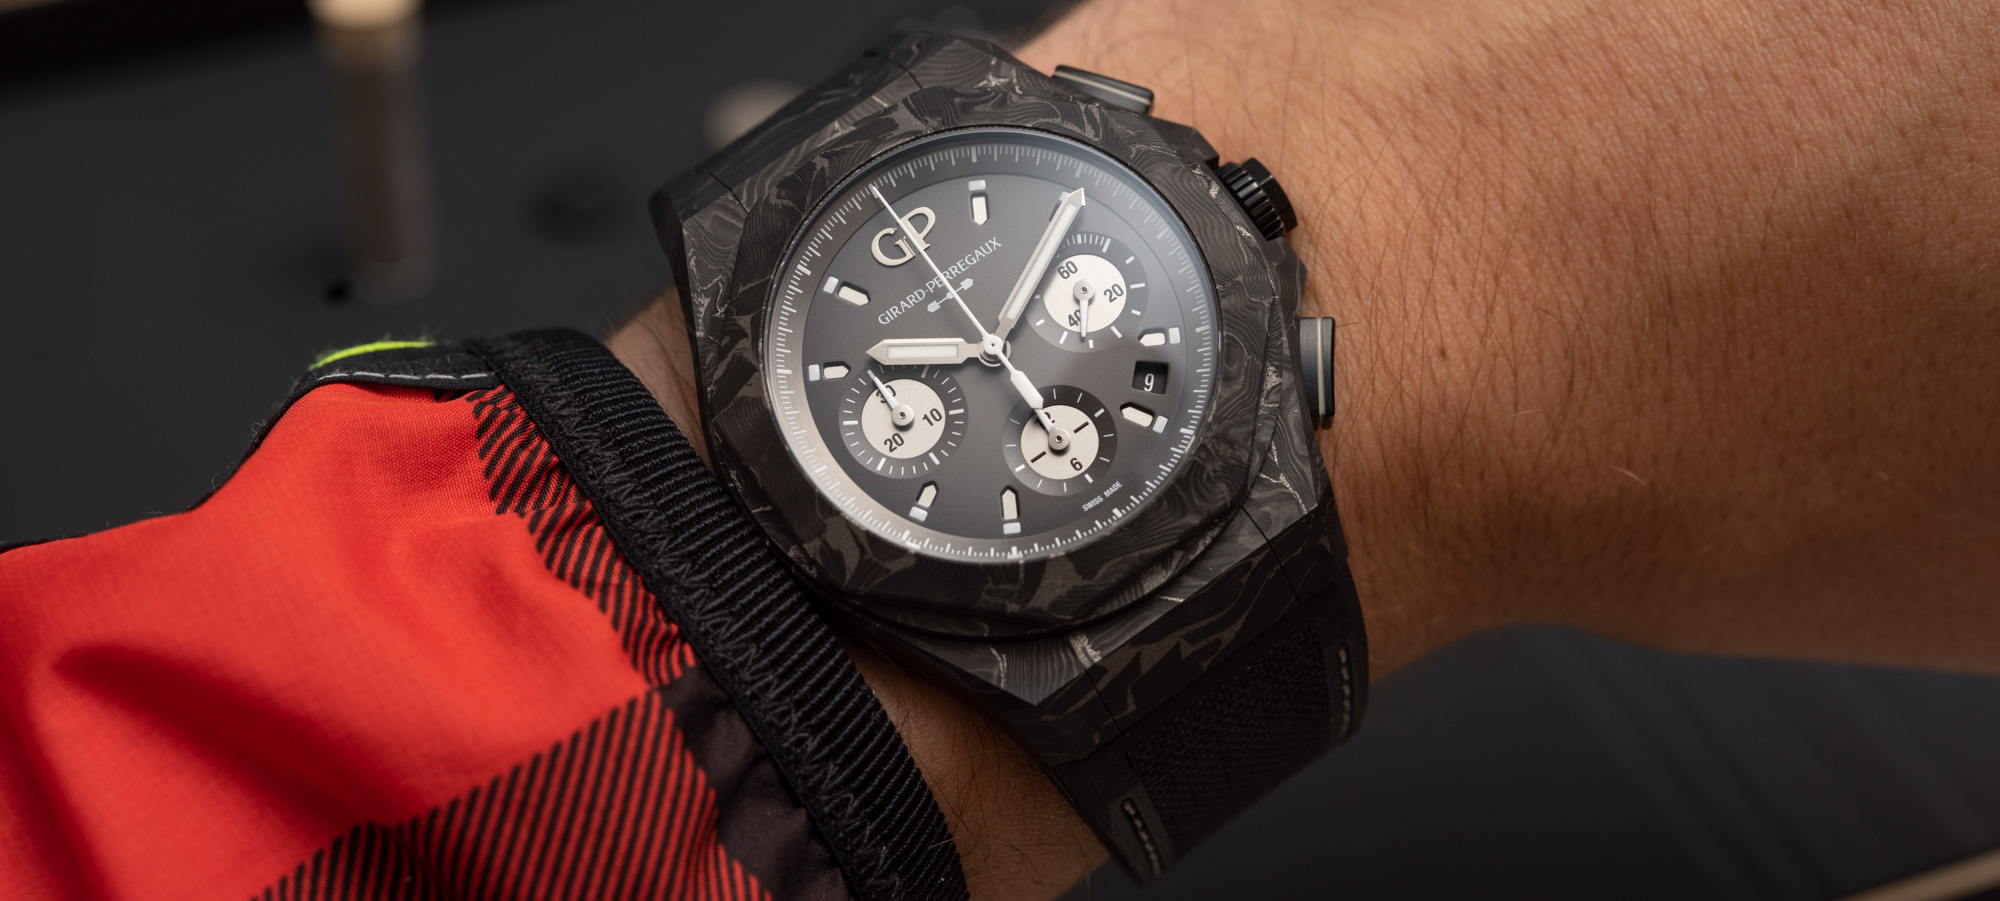 Hands-On: Girard-Perregaux Laureato Absolute Chronograph 8Tech Watch